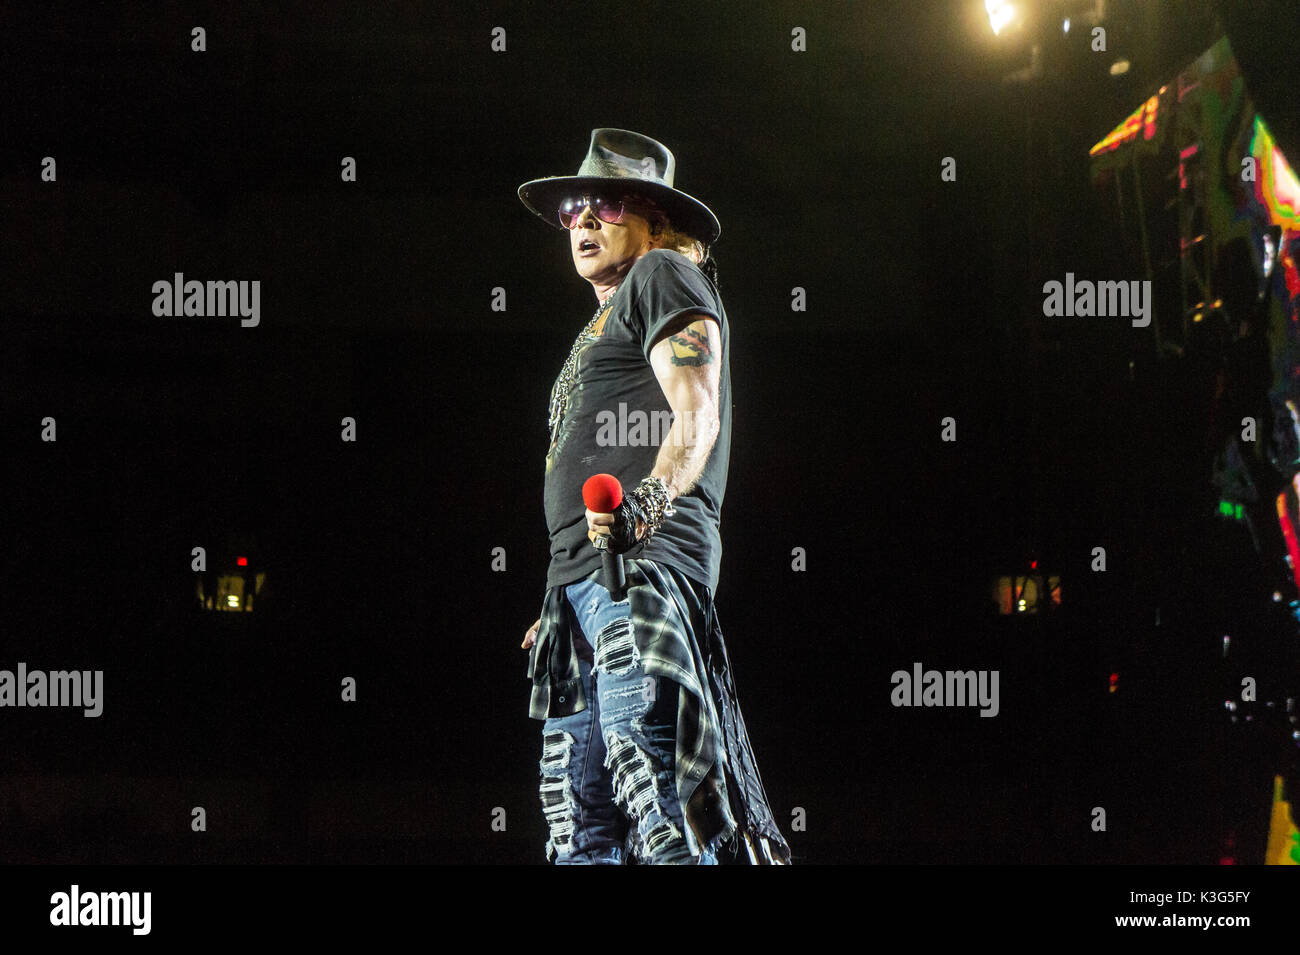 Vancouver, CANADA. 1st Sep, 2017. American rock band Guns N' Roses performing during their 'Not In This Lifetime' tour at BC Place Stadium in Vancouver, BC, CANADA. Credit: Jamie Taylor/Alamy Live News. Stock Photo